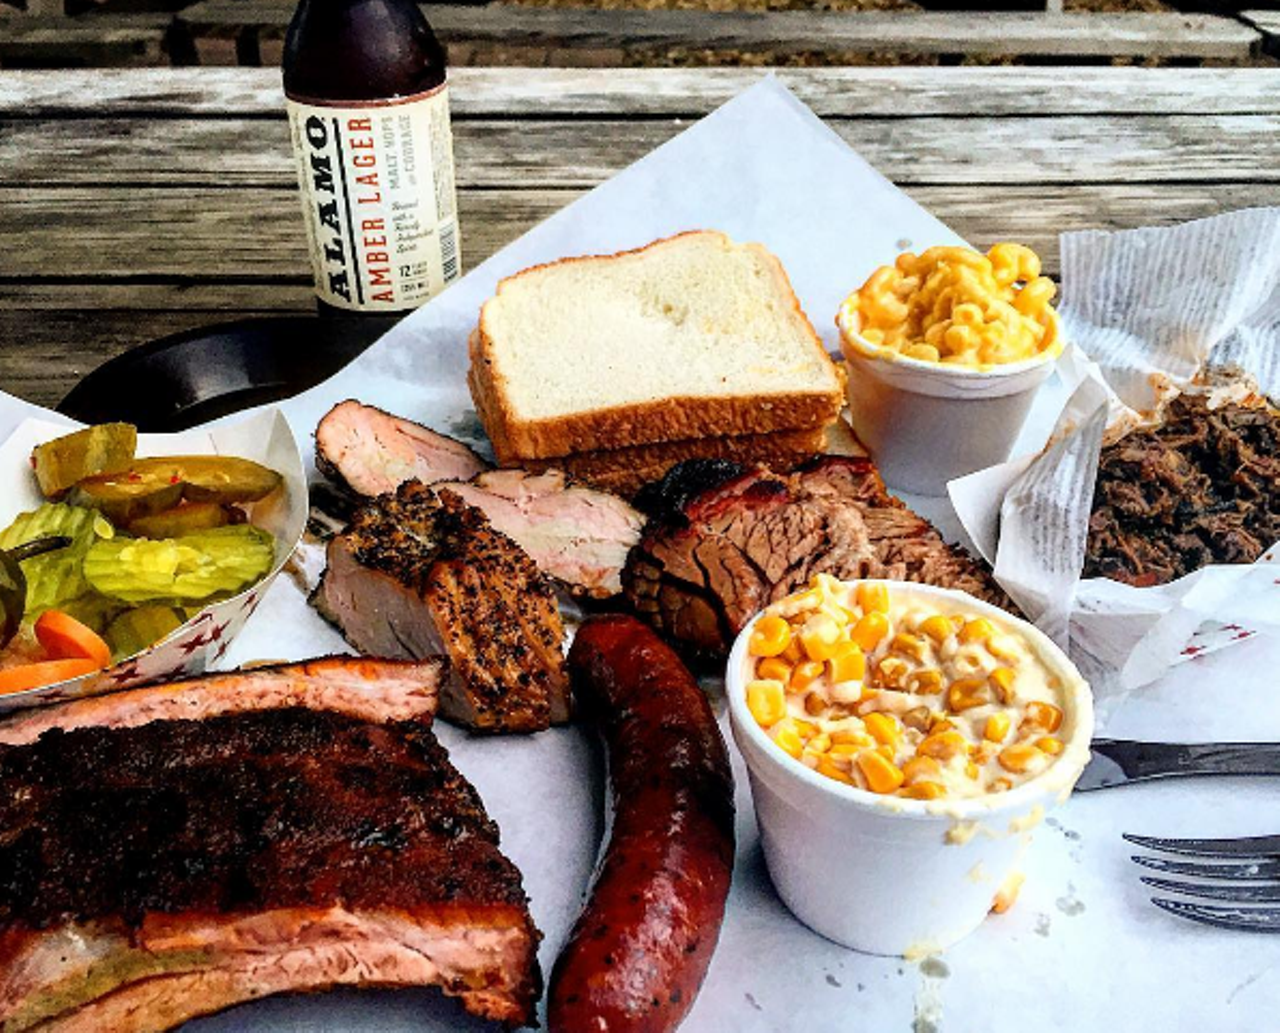  Best Restaurant to Take a Tourist:Two Bros BBQ Market
Photo via Instagram/mcsessions